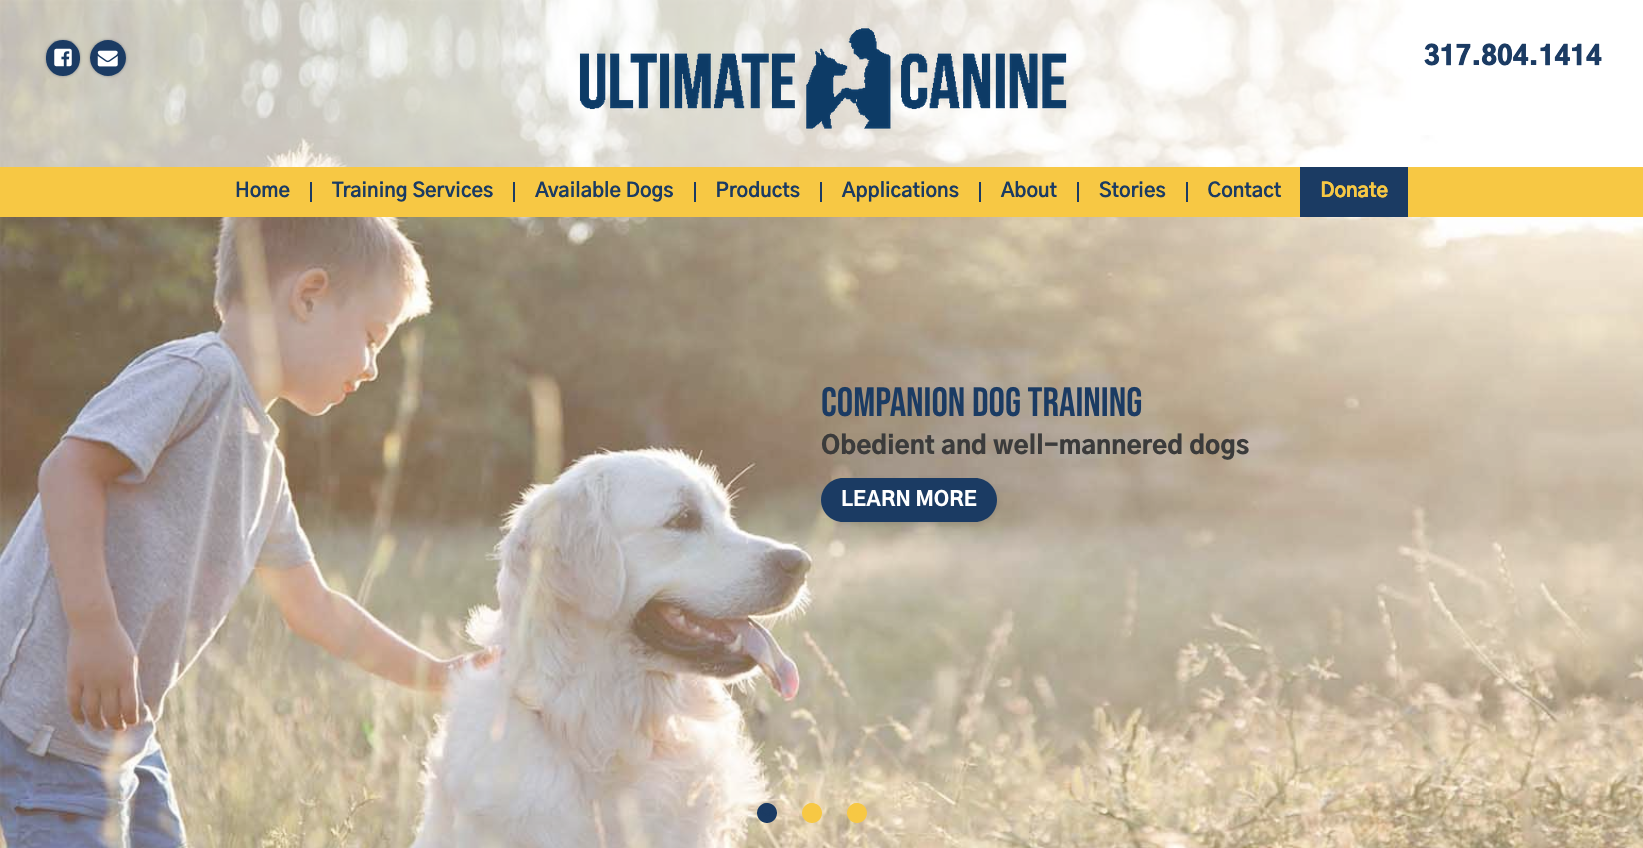 Companion Dogs for Sale & Obedience Training Ultimate Canine